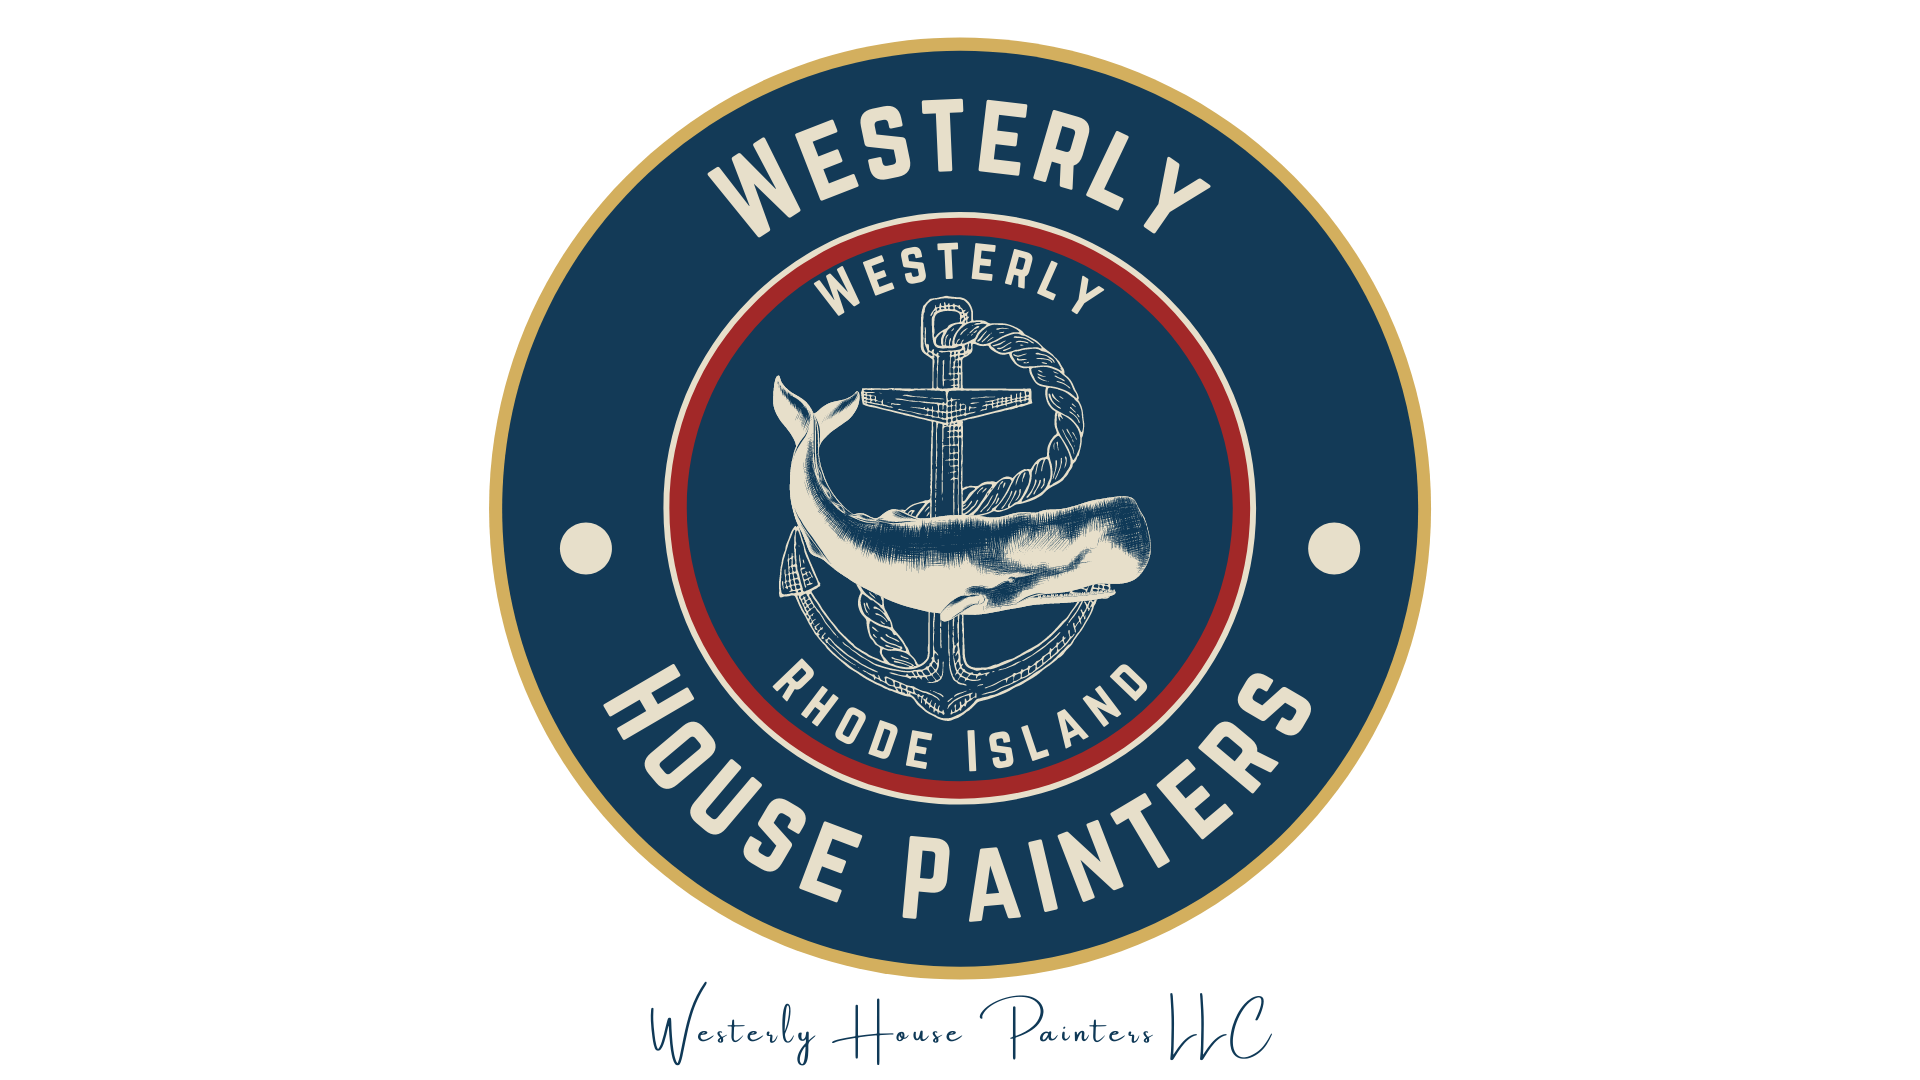 Westerly House Painters LLC